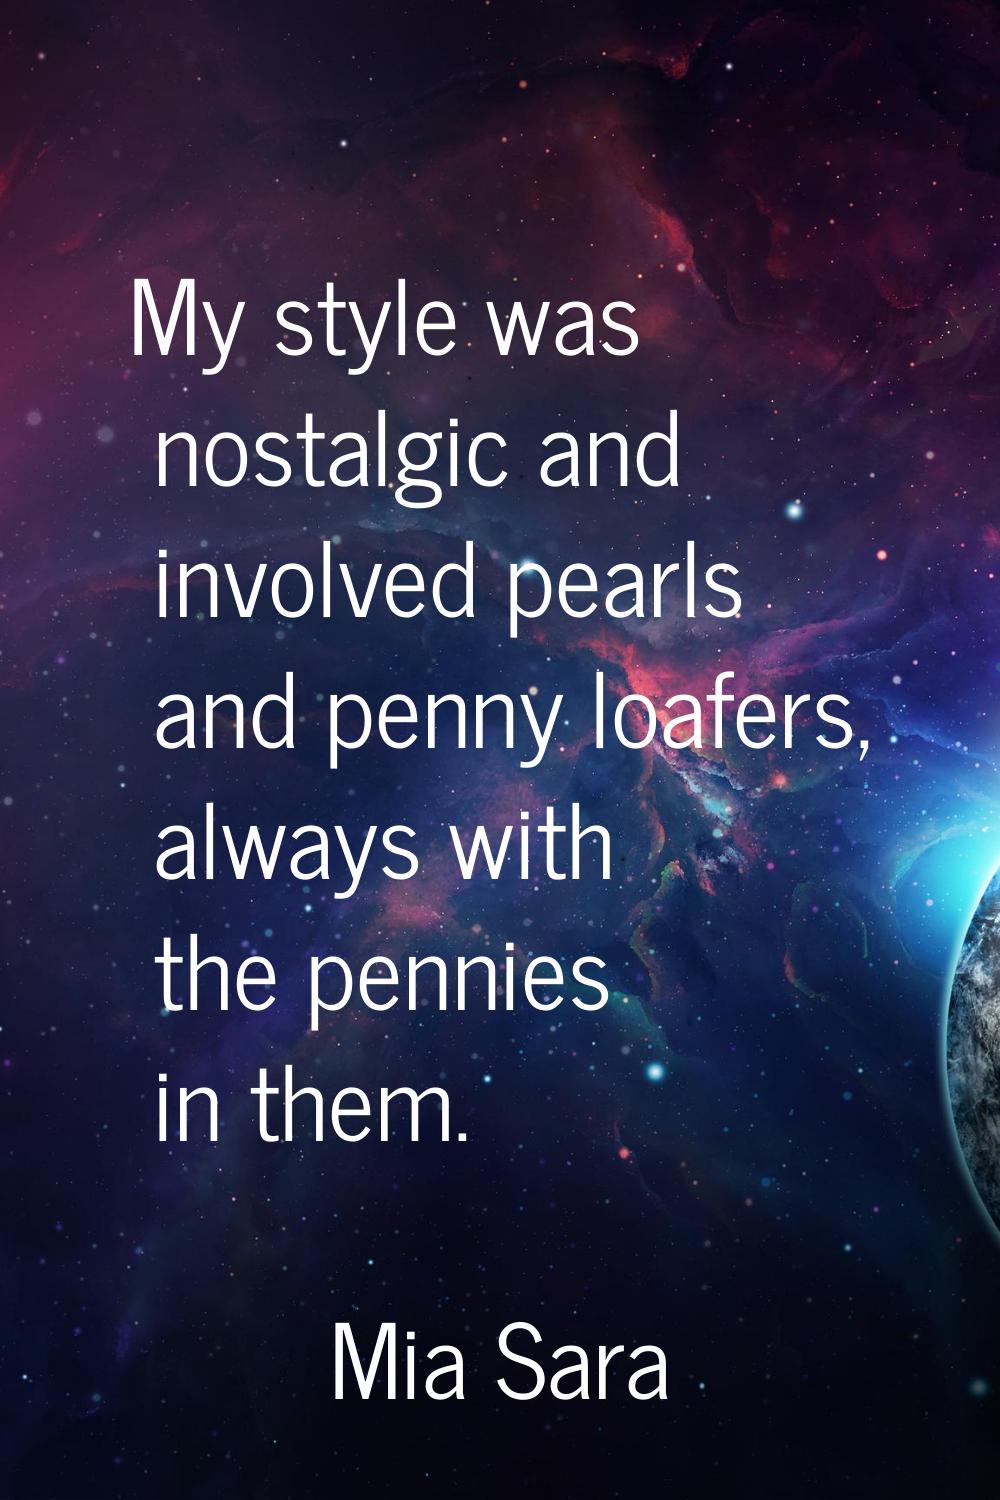 My style was nostalgic and involved pearls and penny loafers, always with the pennies in them.